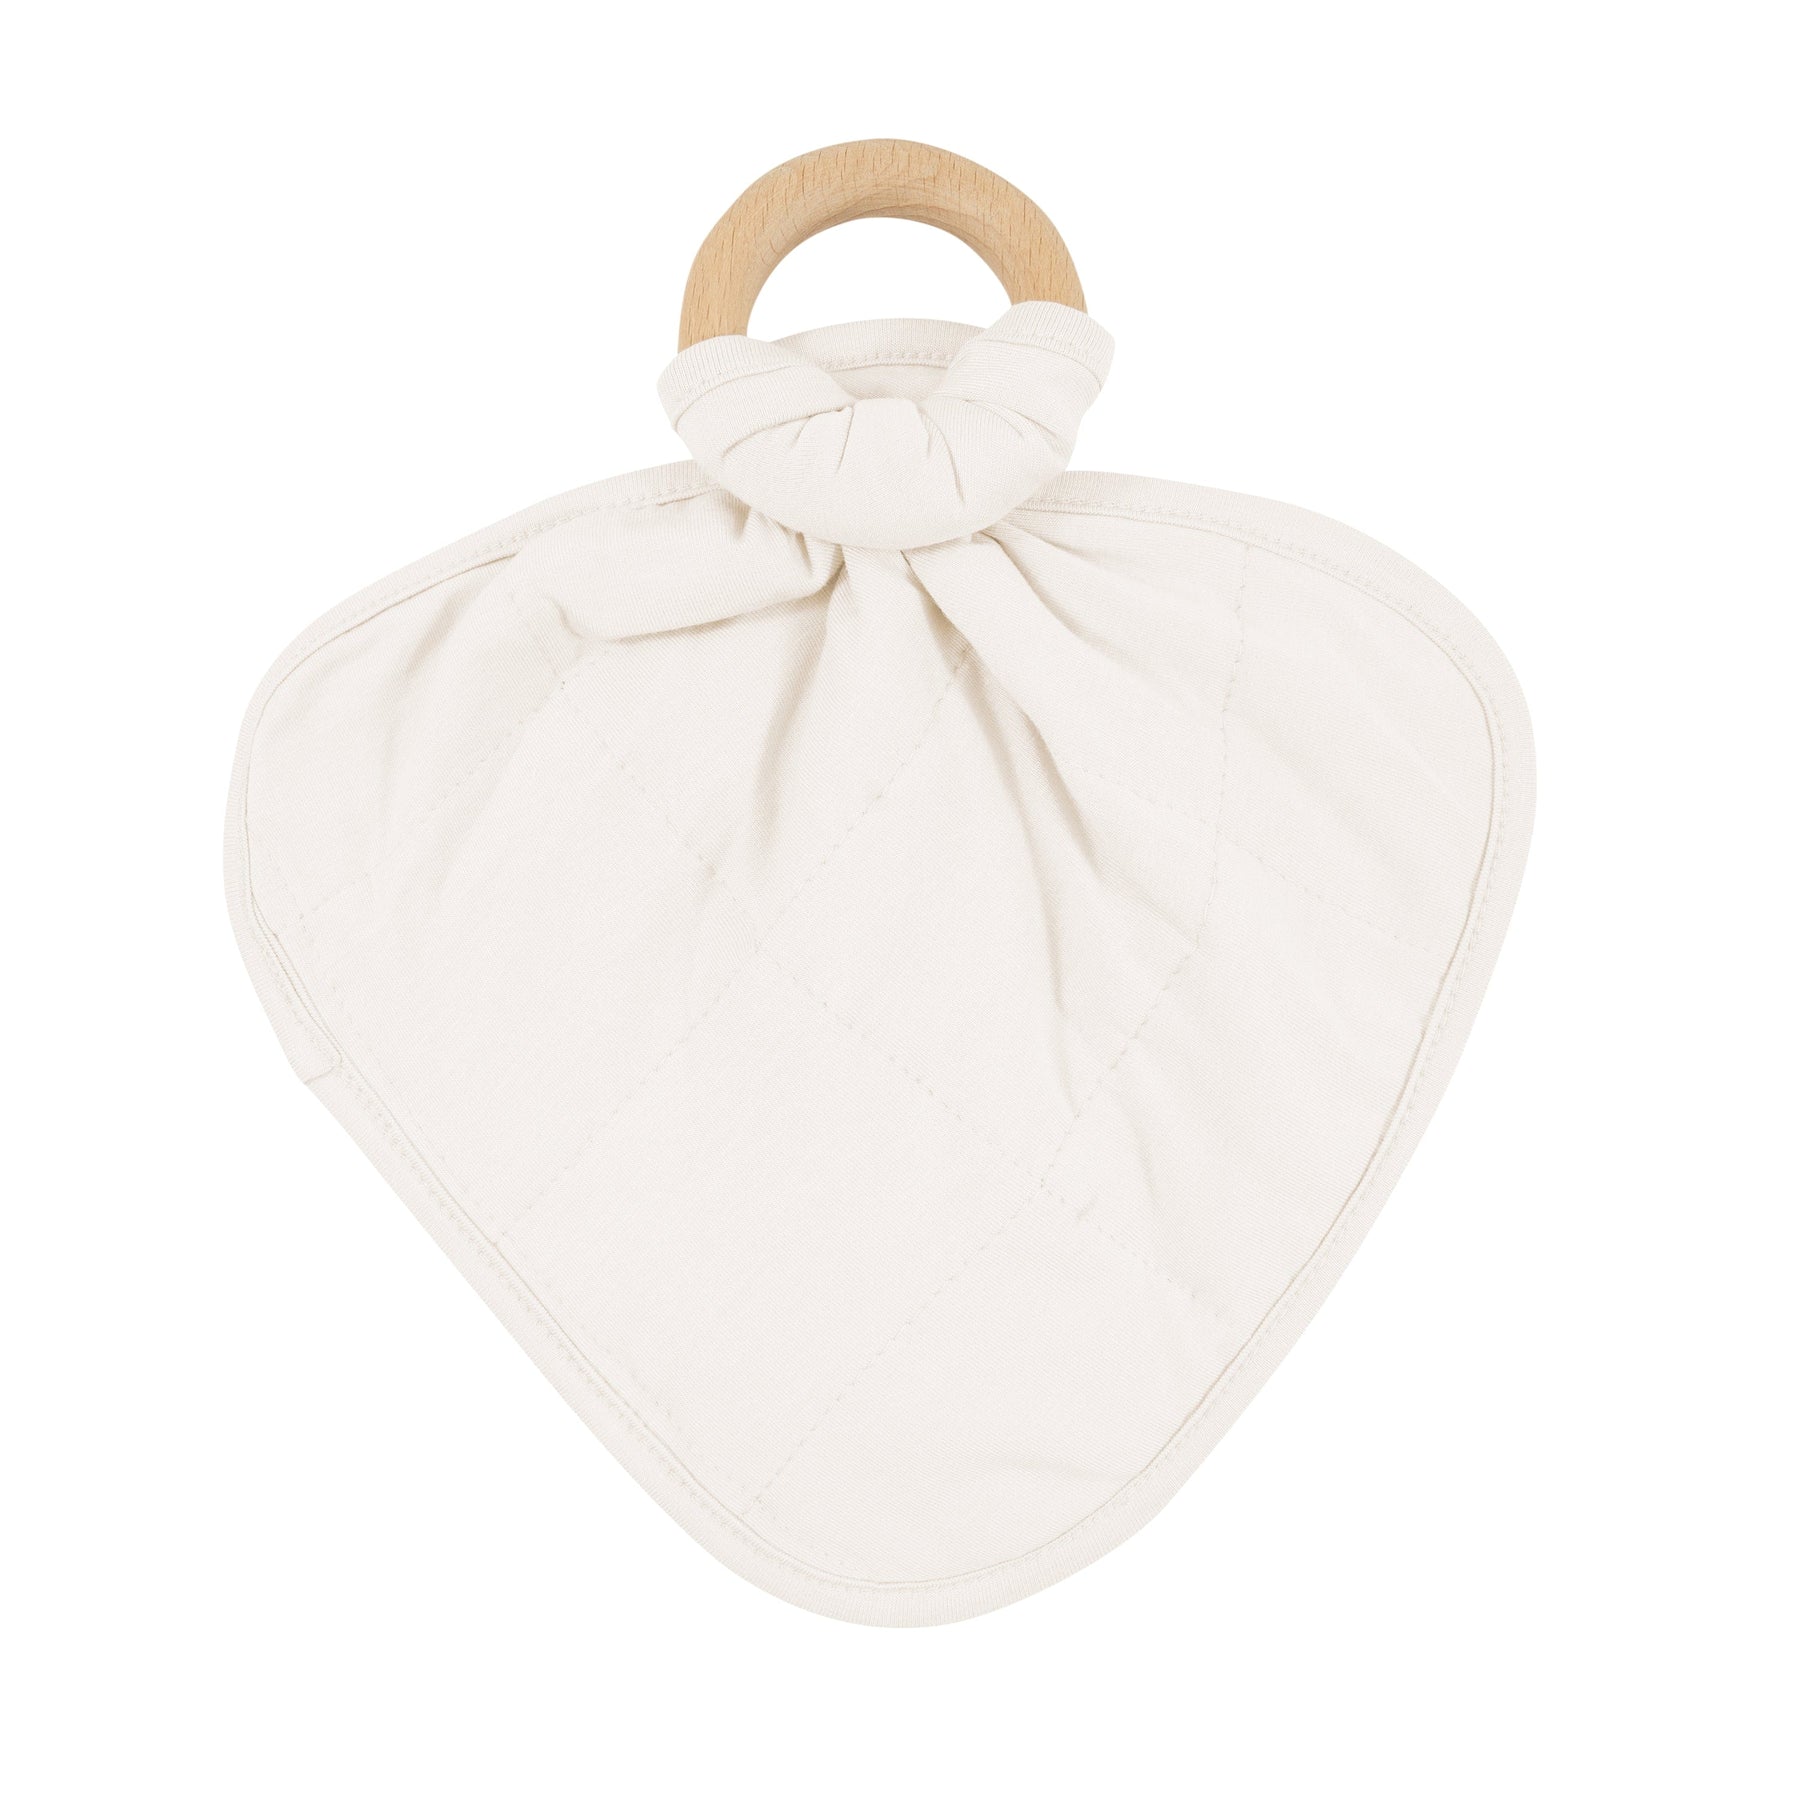 Kyte Baby Lovey Oat / Infant Lovey in Oat with Removable Wooden Teething Ring